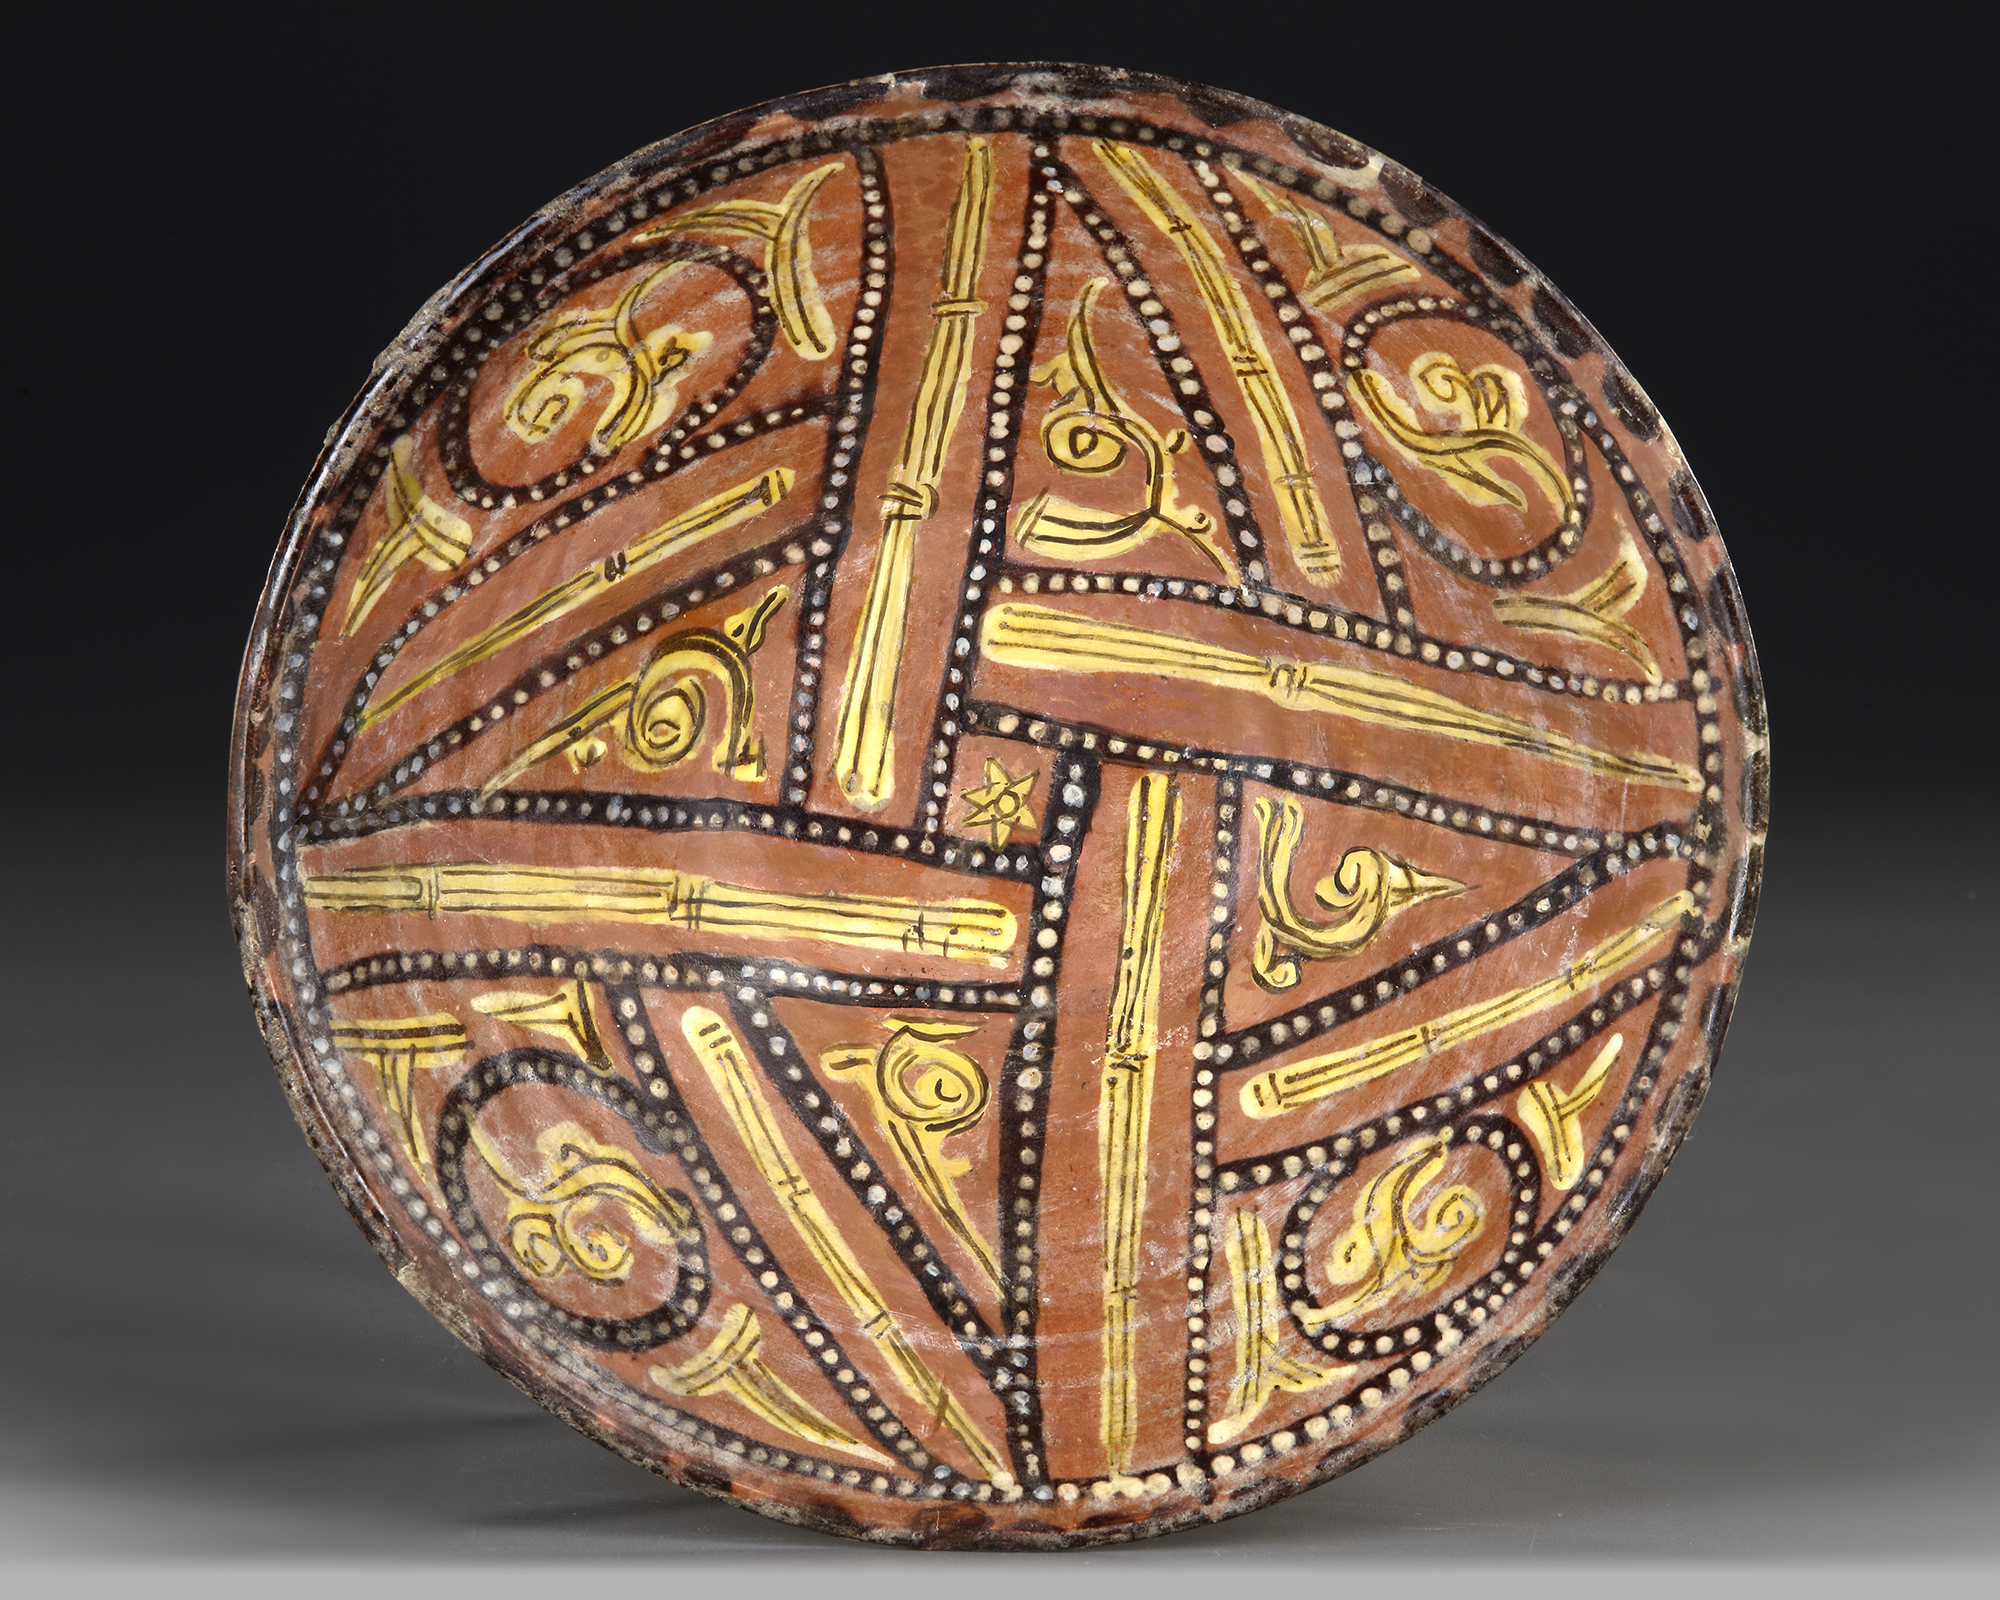 A NISHAPUR CONICAL POTTERY BOWL, PERSIA, 10TH CENTURY